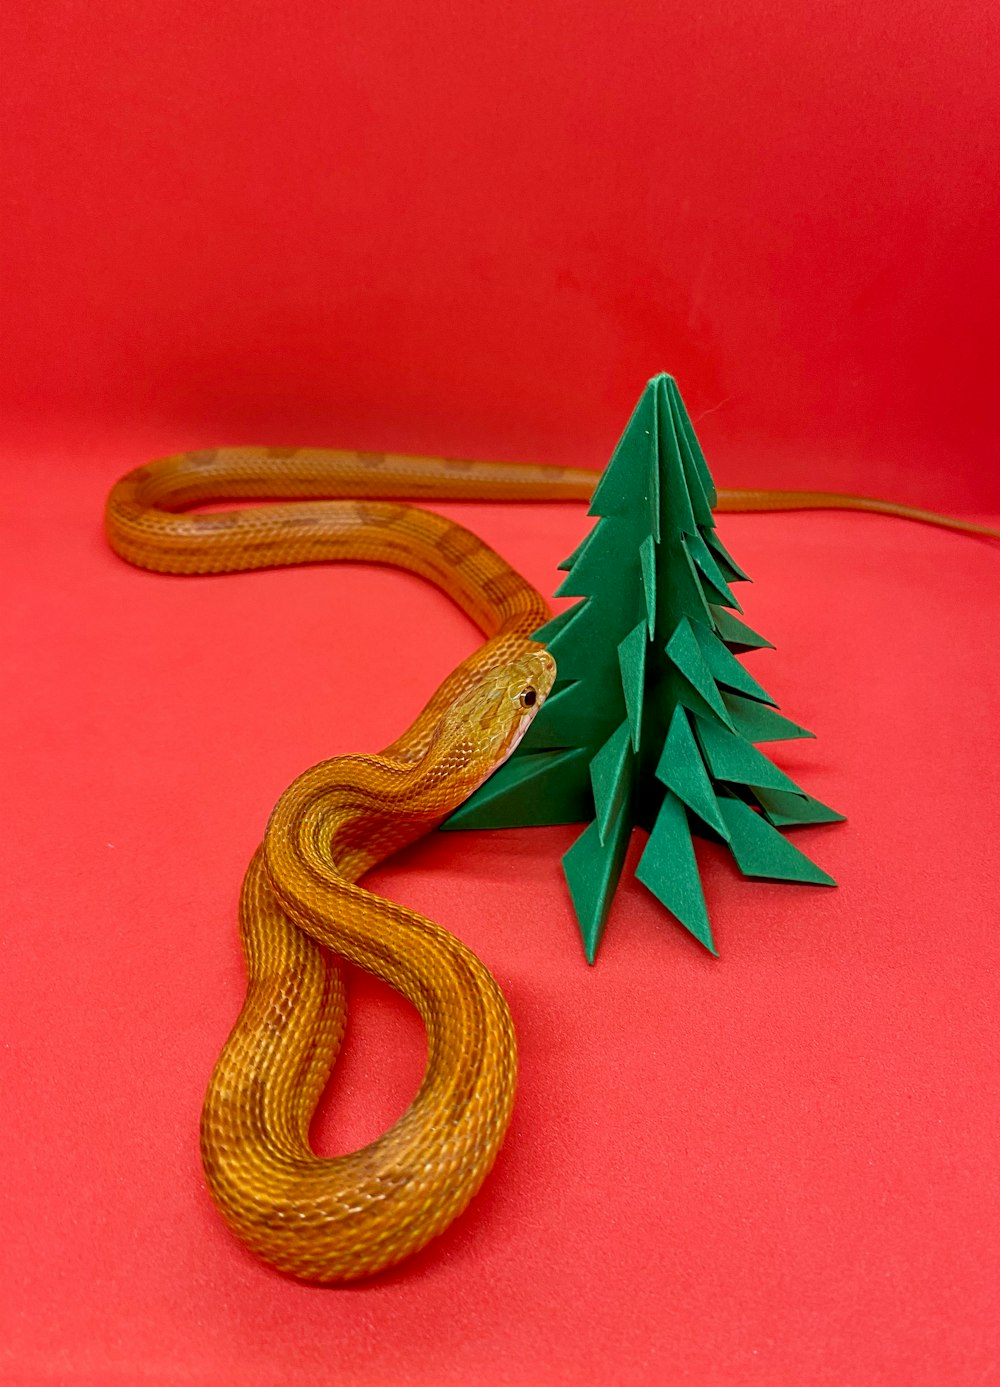 green and yellow snake on red surface